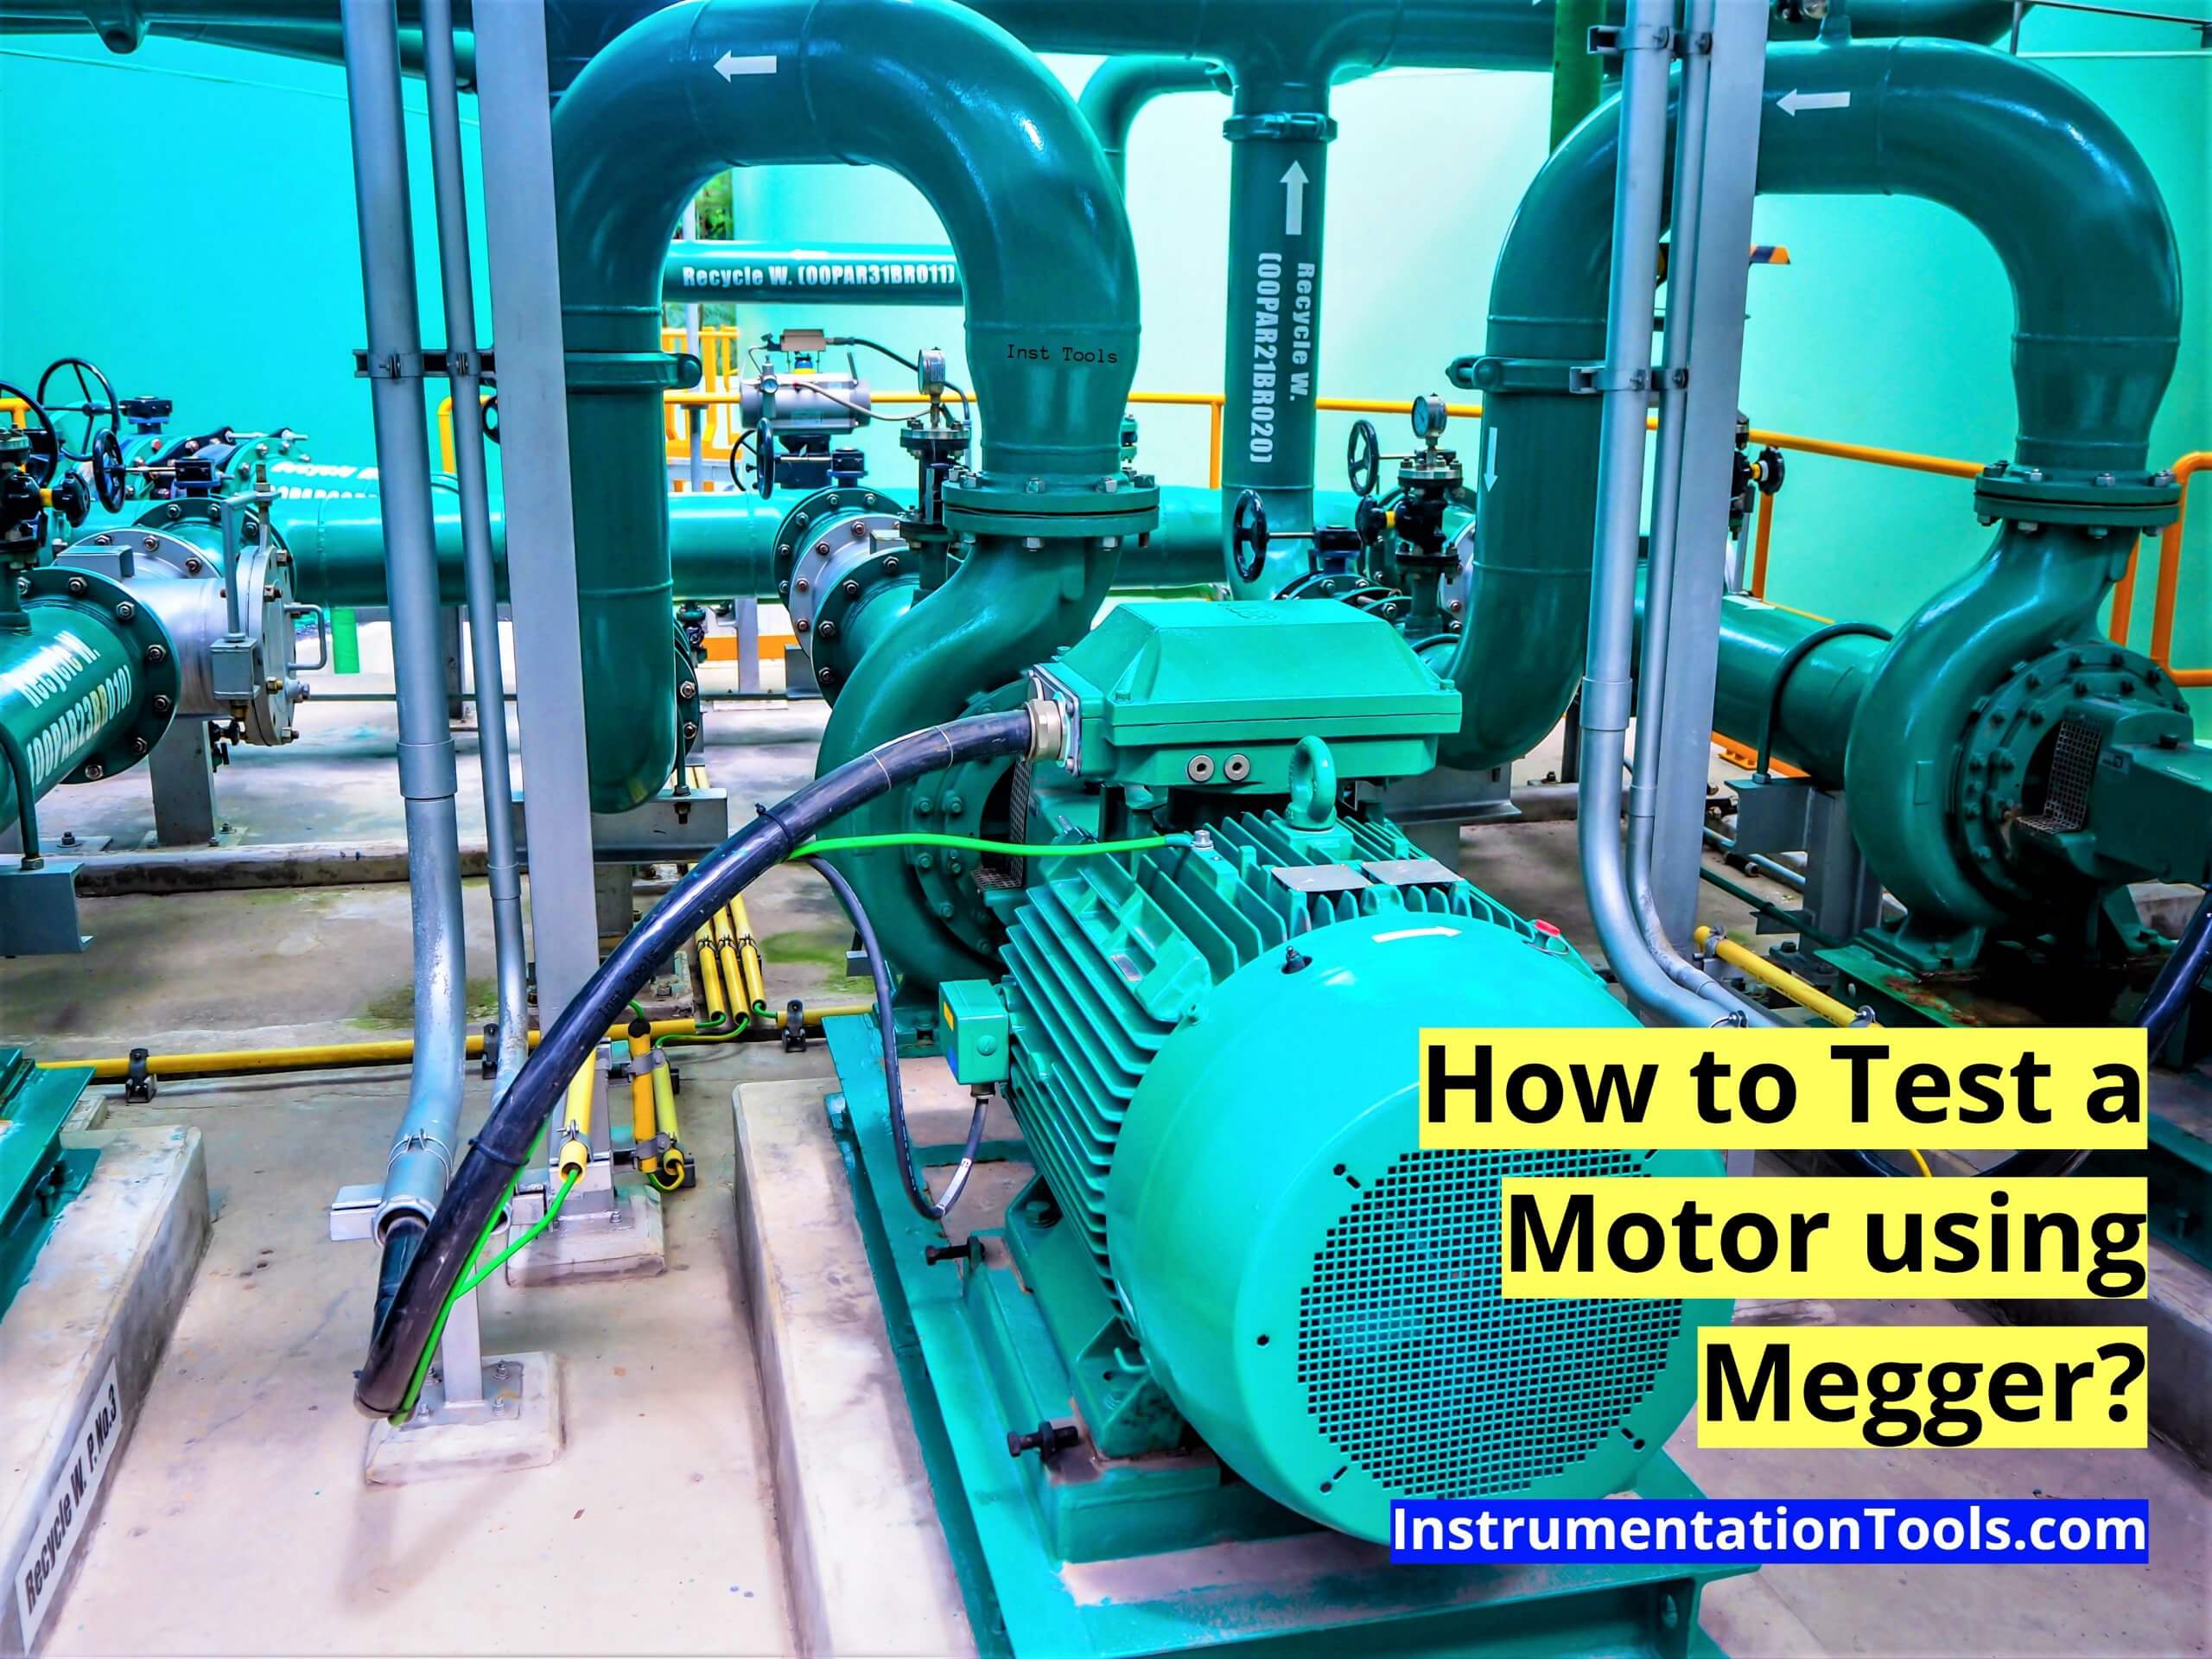 How to Test a Motor using Megger